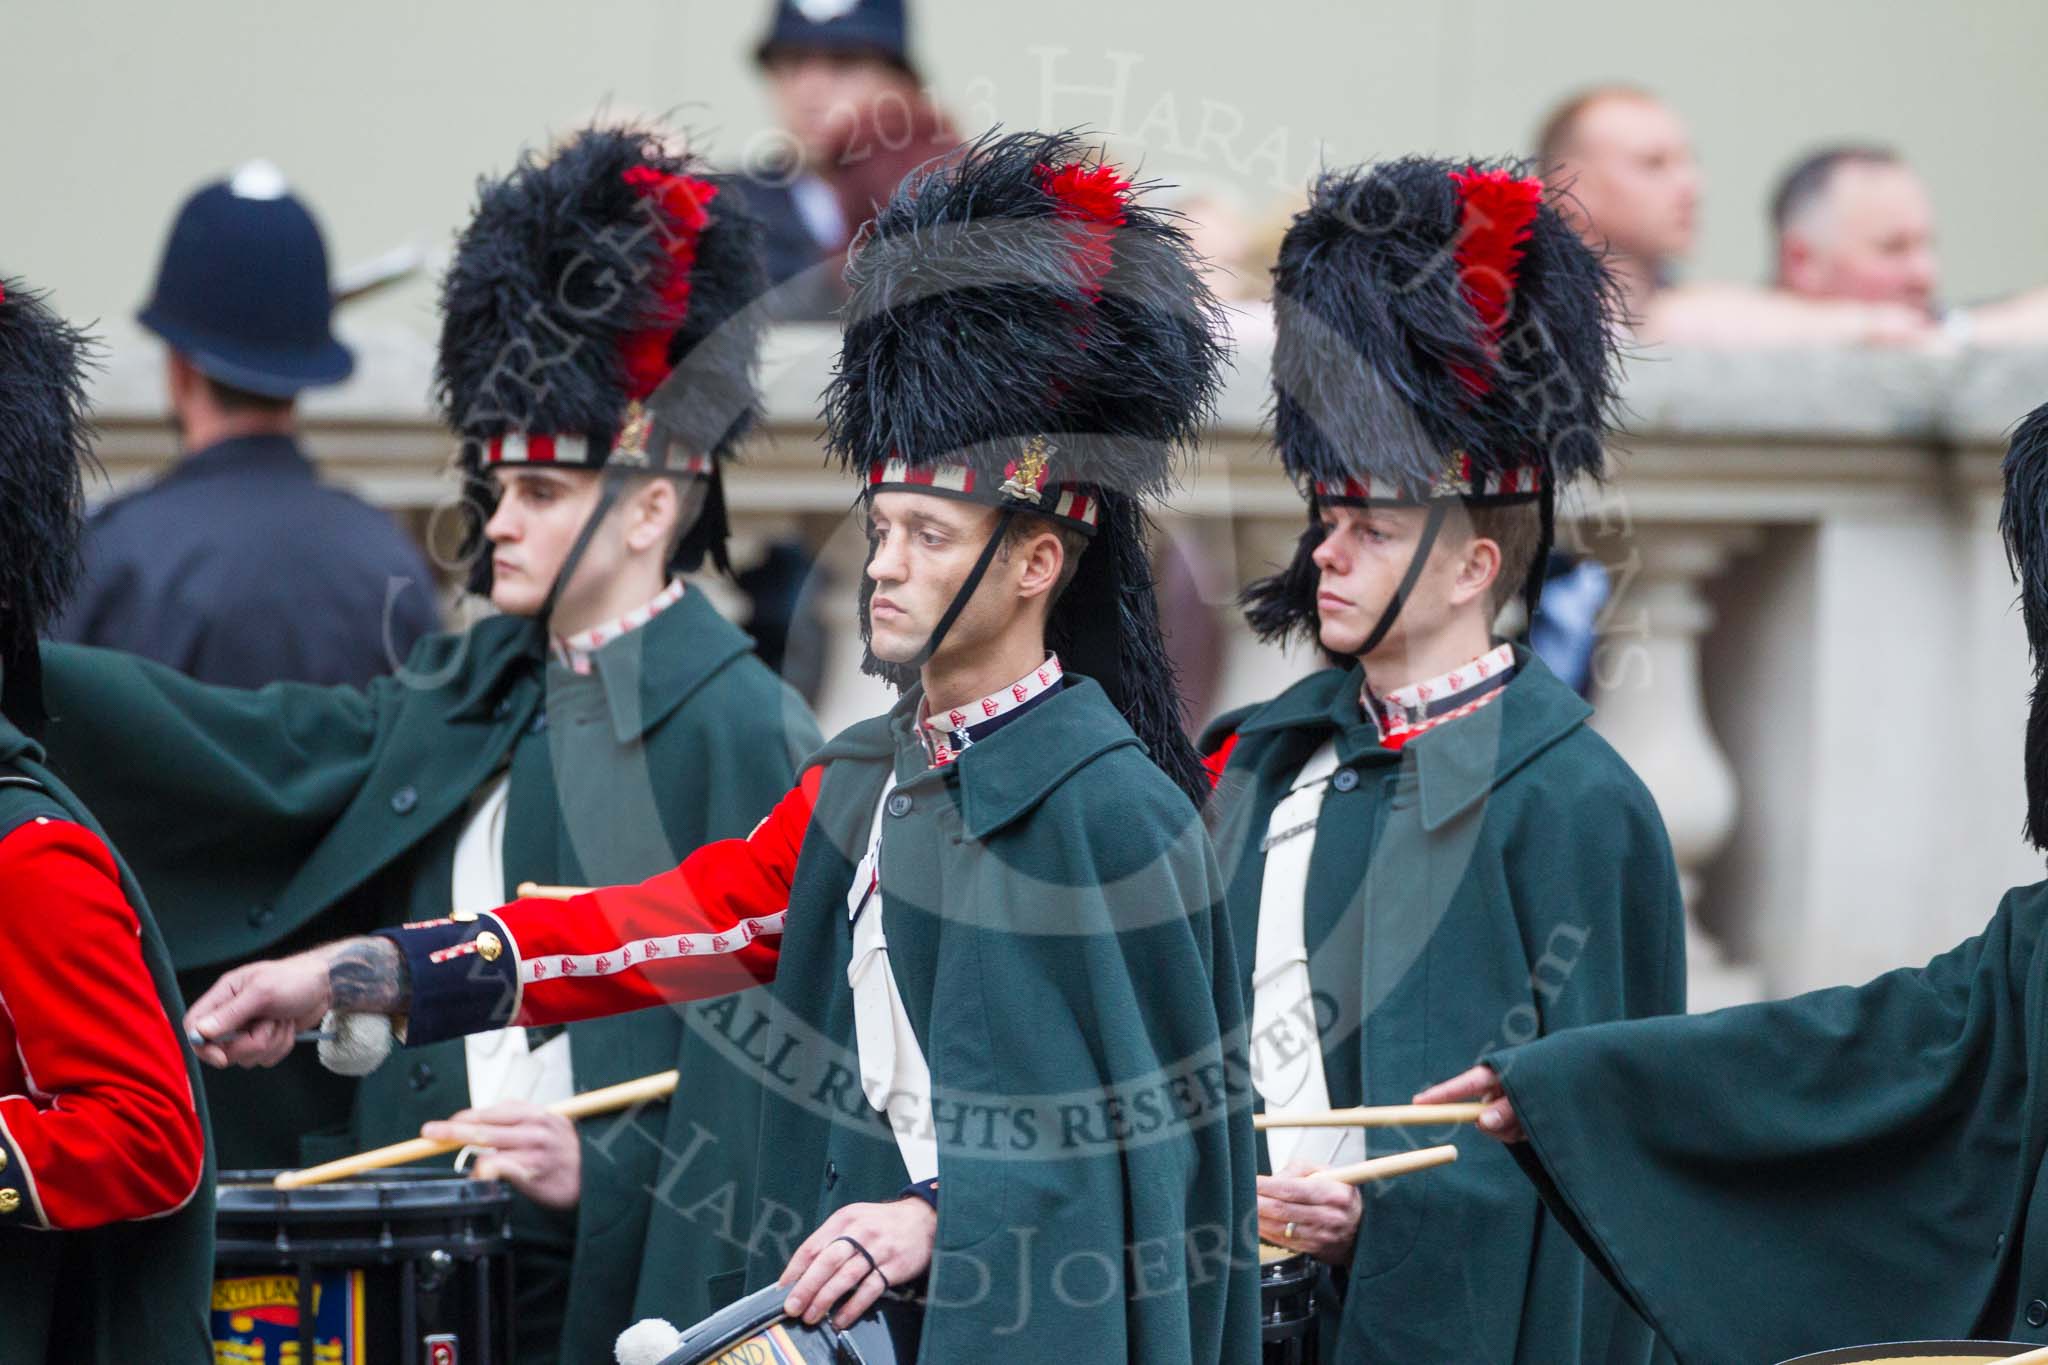 Remembrance Sunday at the Cenotaph 2015: Members of the Pipes and Drums leaving Whitehall after the event. Image #365, 08 November 2015 12:31 Whitehall, London, UK